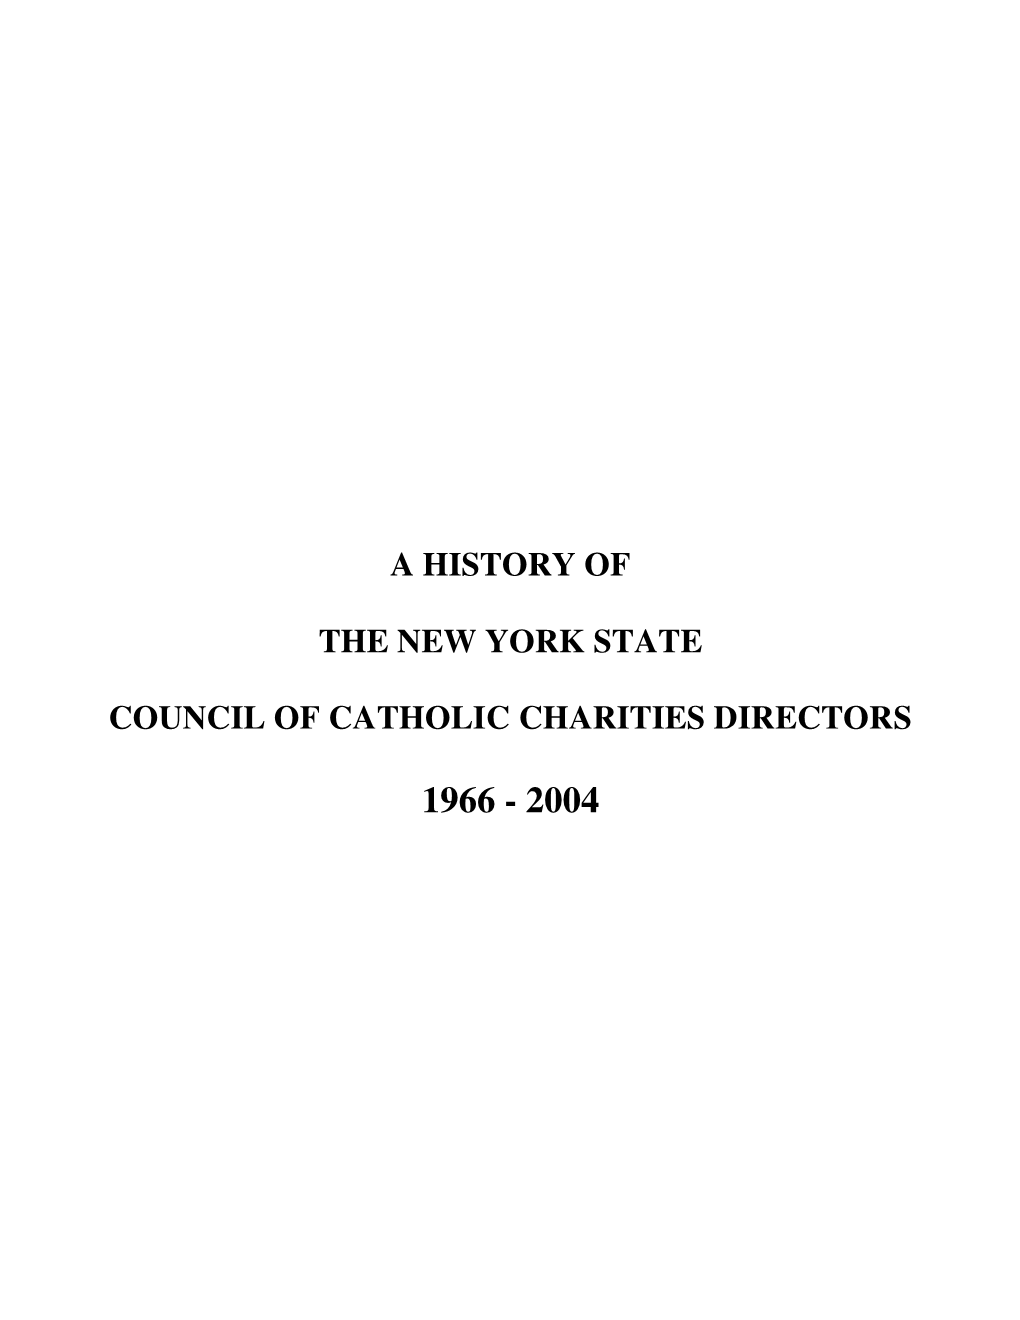 A History of the New York State Council